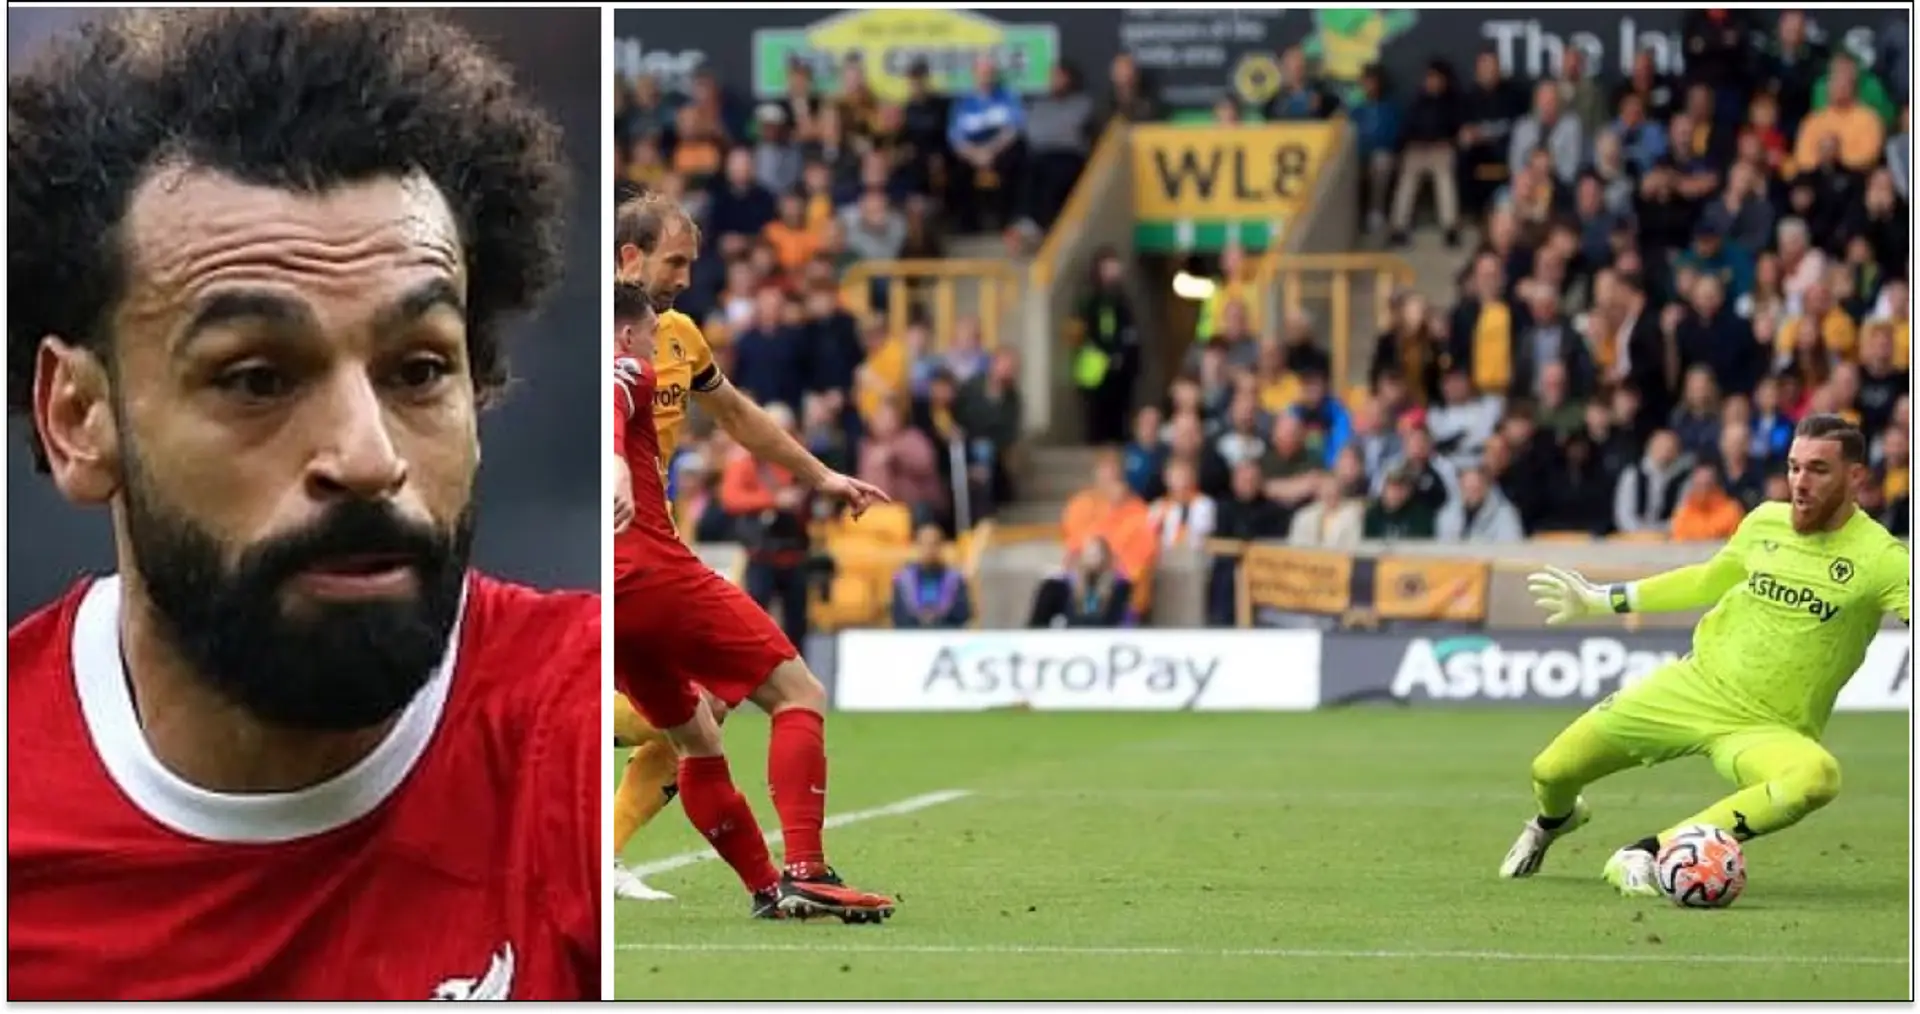 Late goals, Mo's assist fest: Watch Wolves v Liverpool highlights (video)